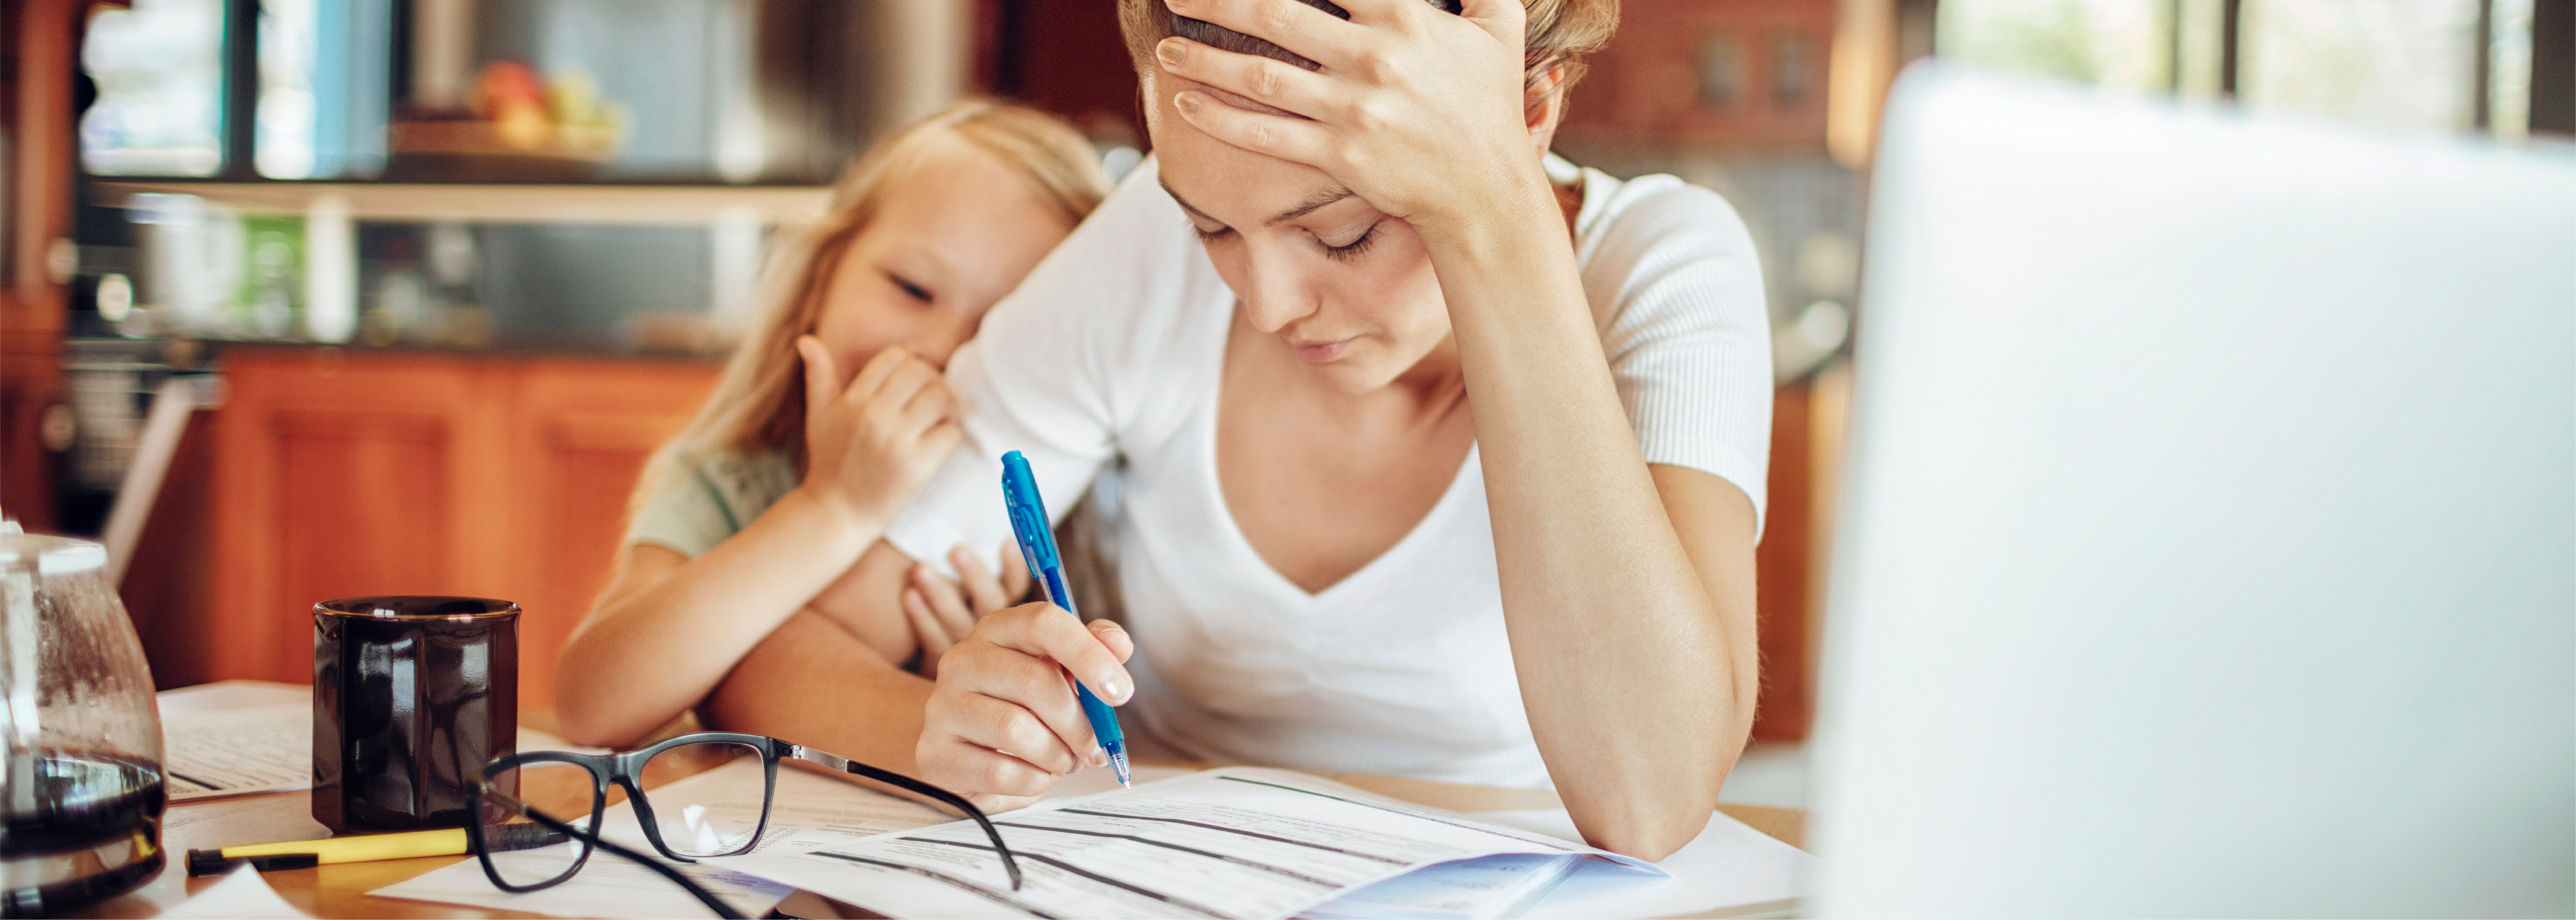 Overworked mom signing forms with kid